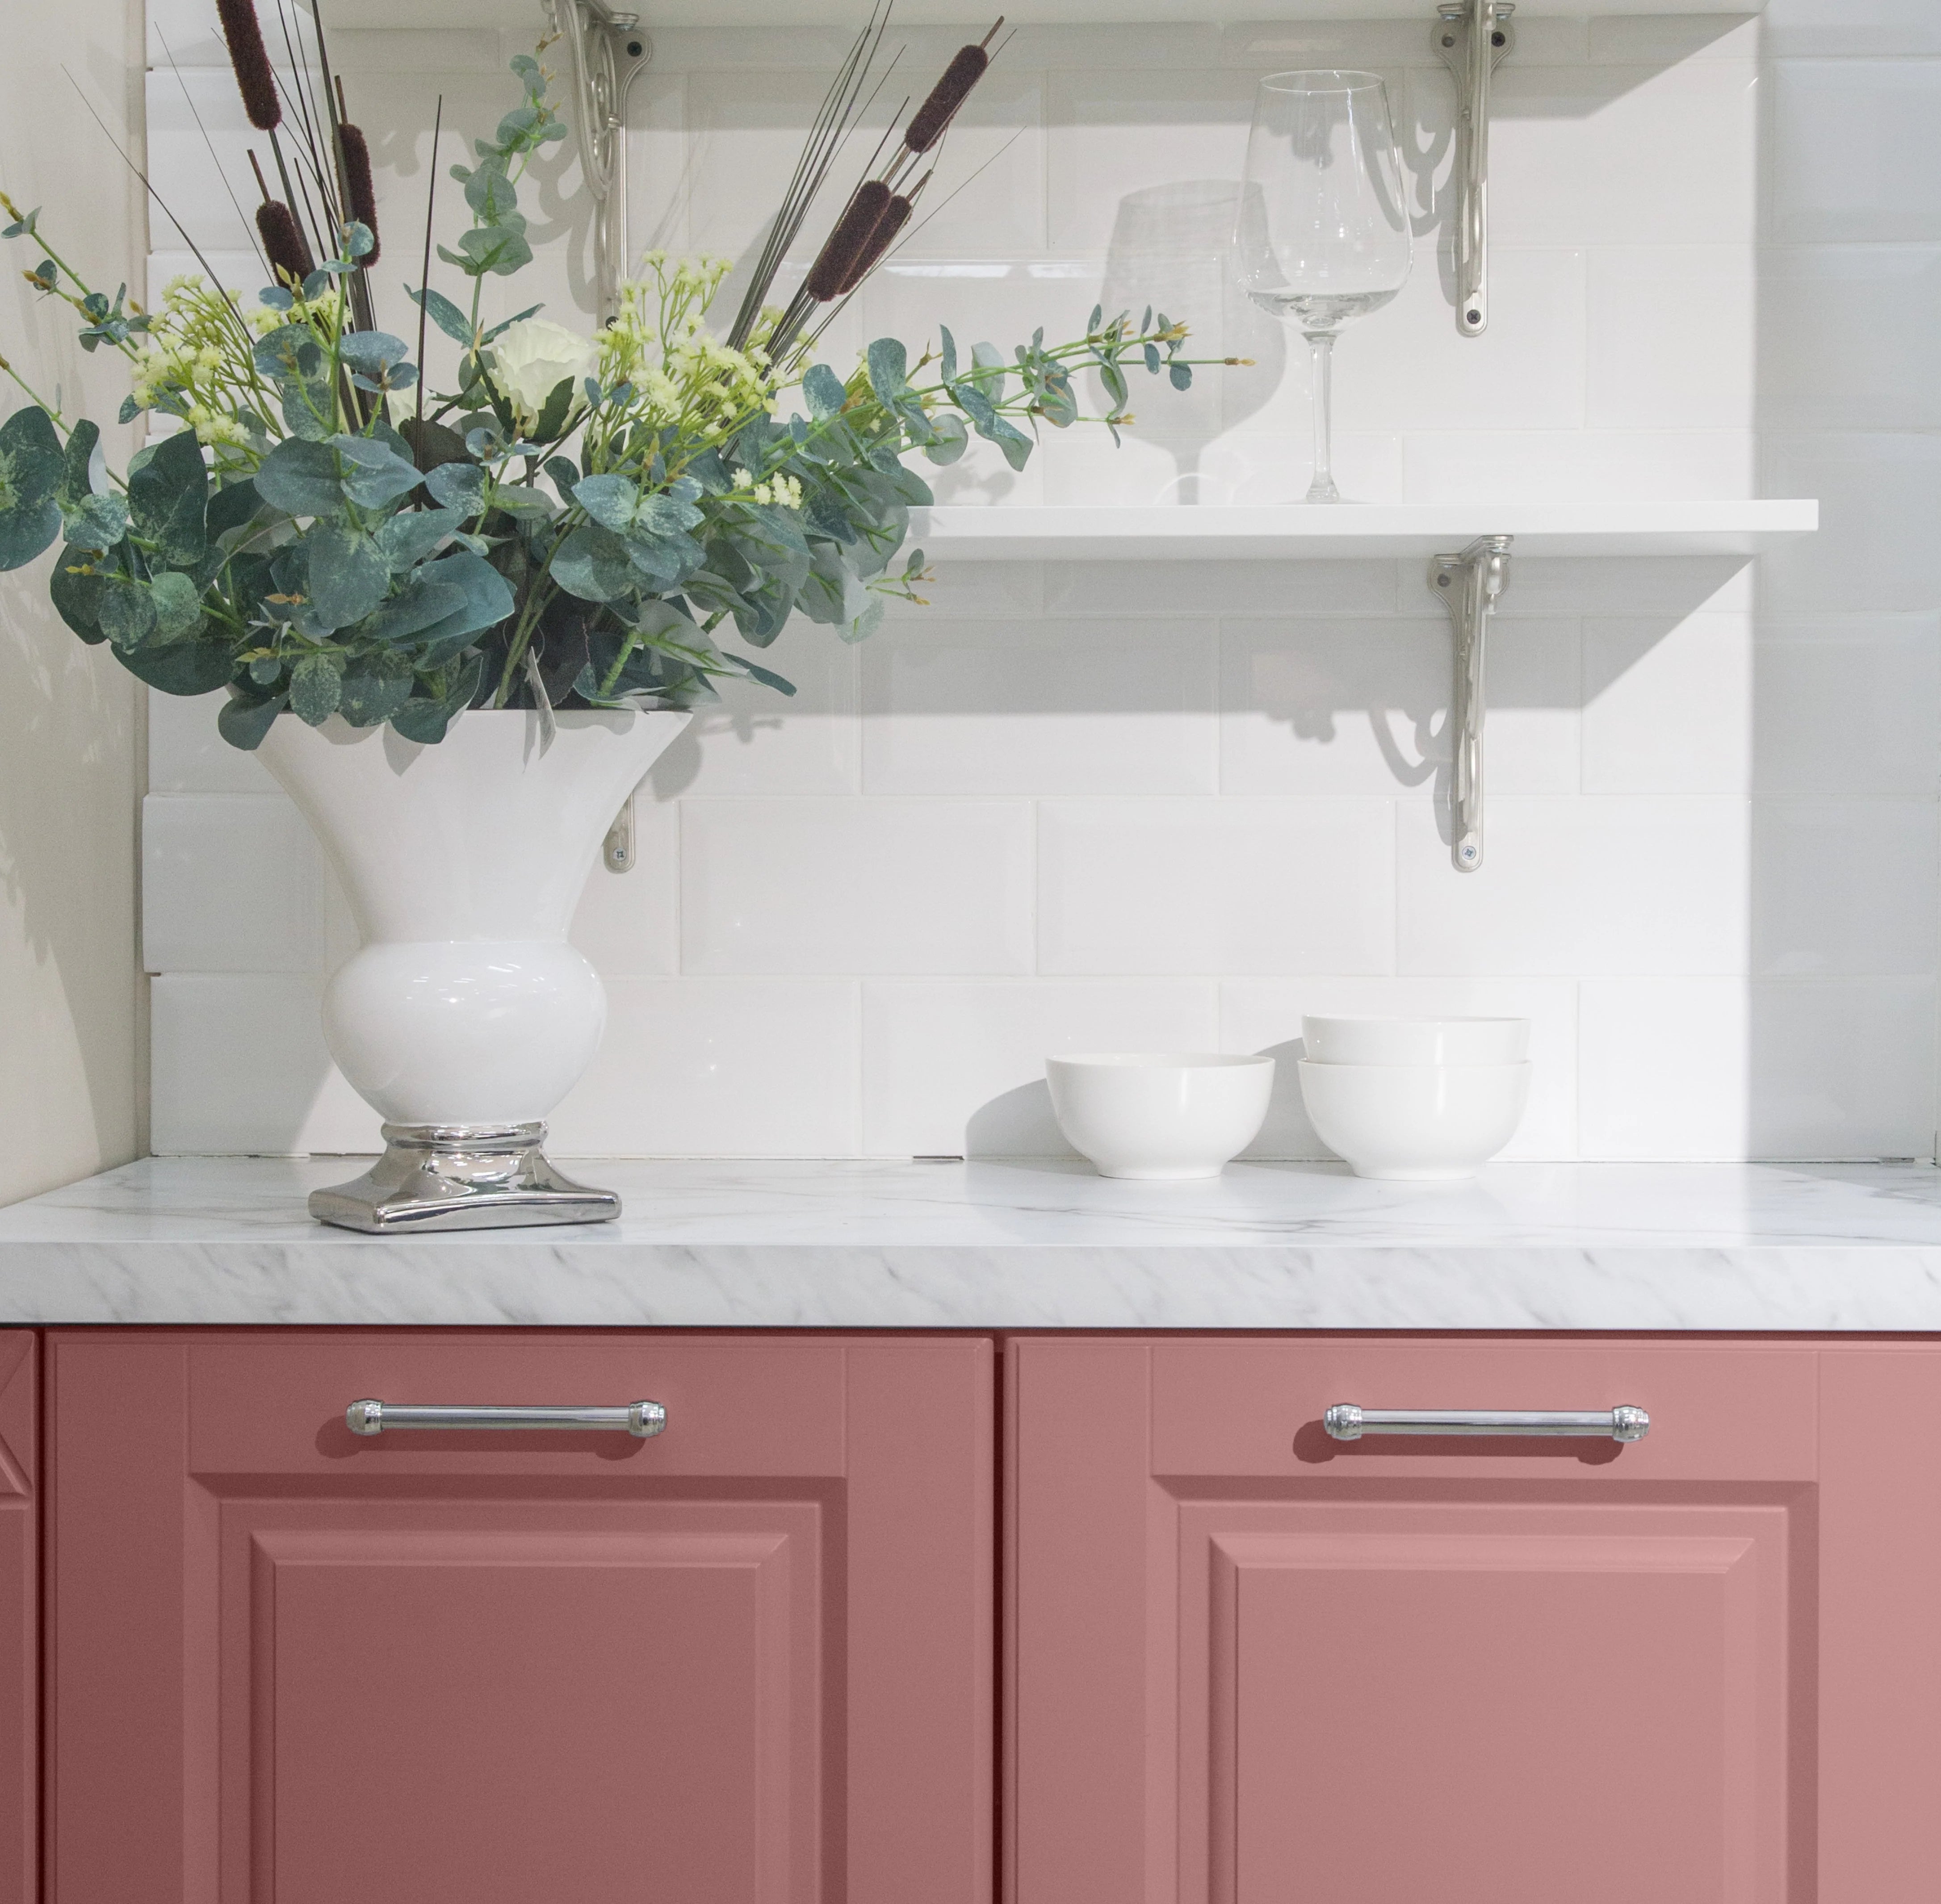 Colourtrend Pink Chocolate | Same Day Dublin and Nationwide Paint in Ireland Delivery by Weirs of Baggot Street - Official Colourtrend Stockist